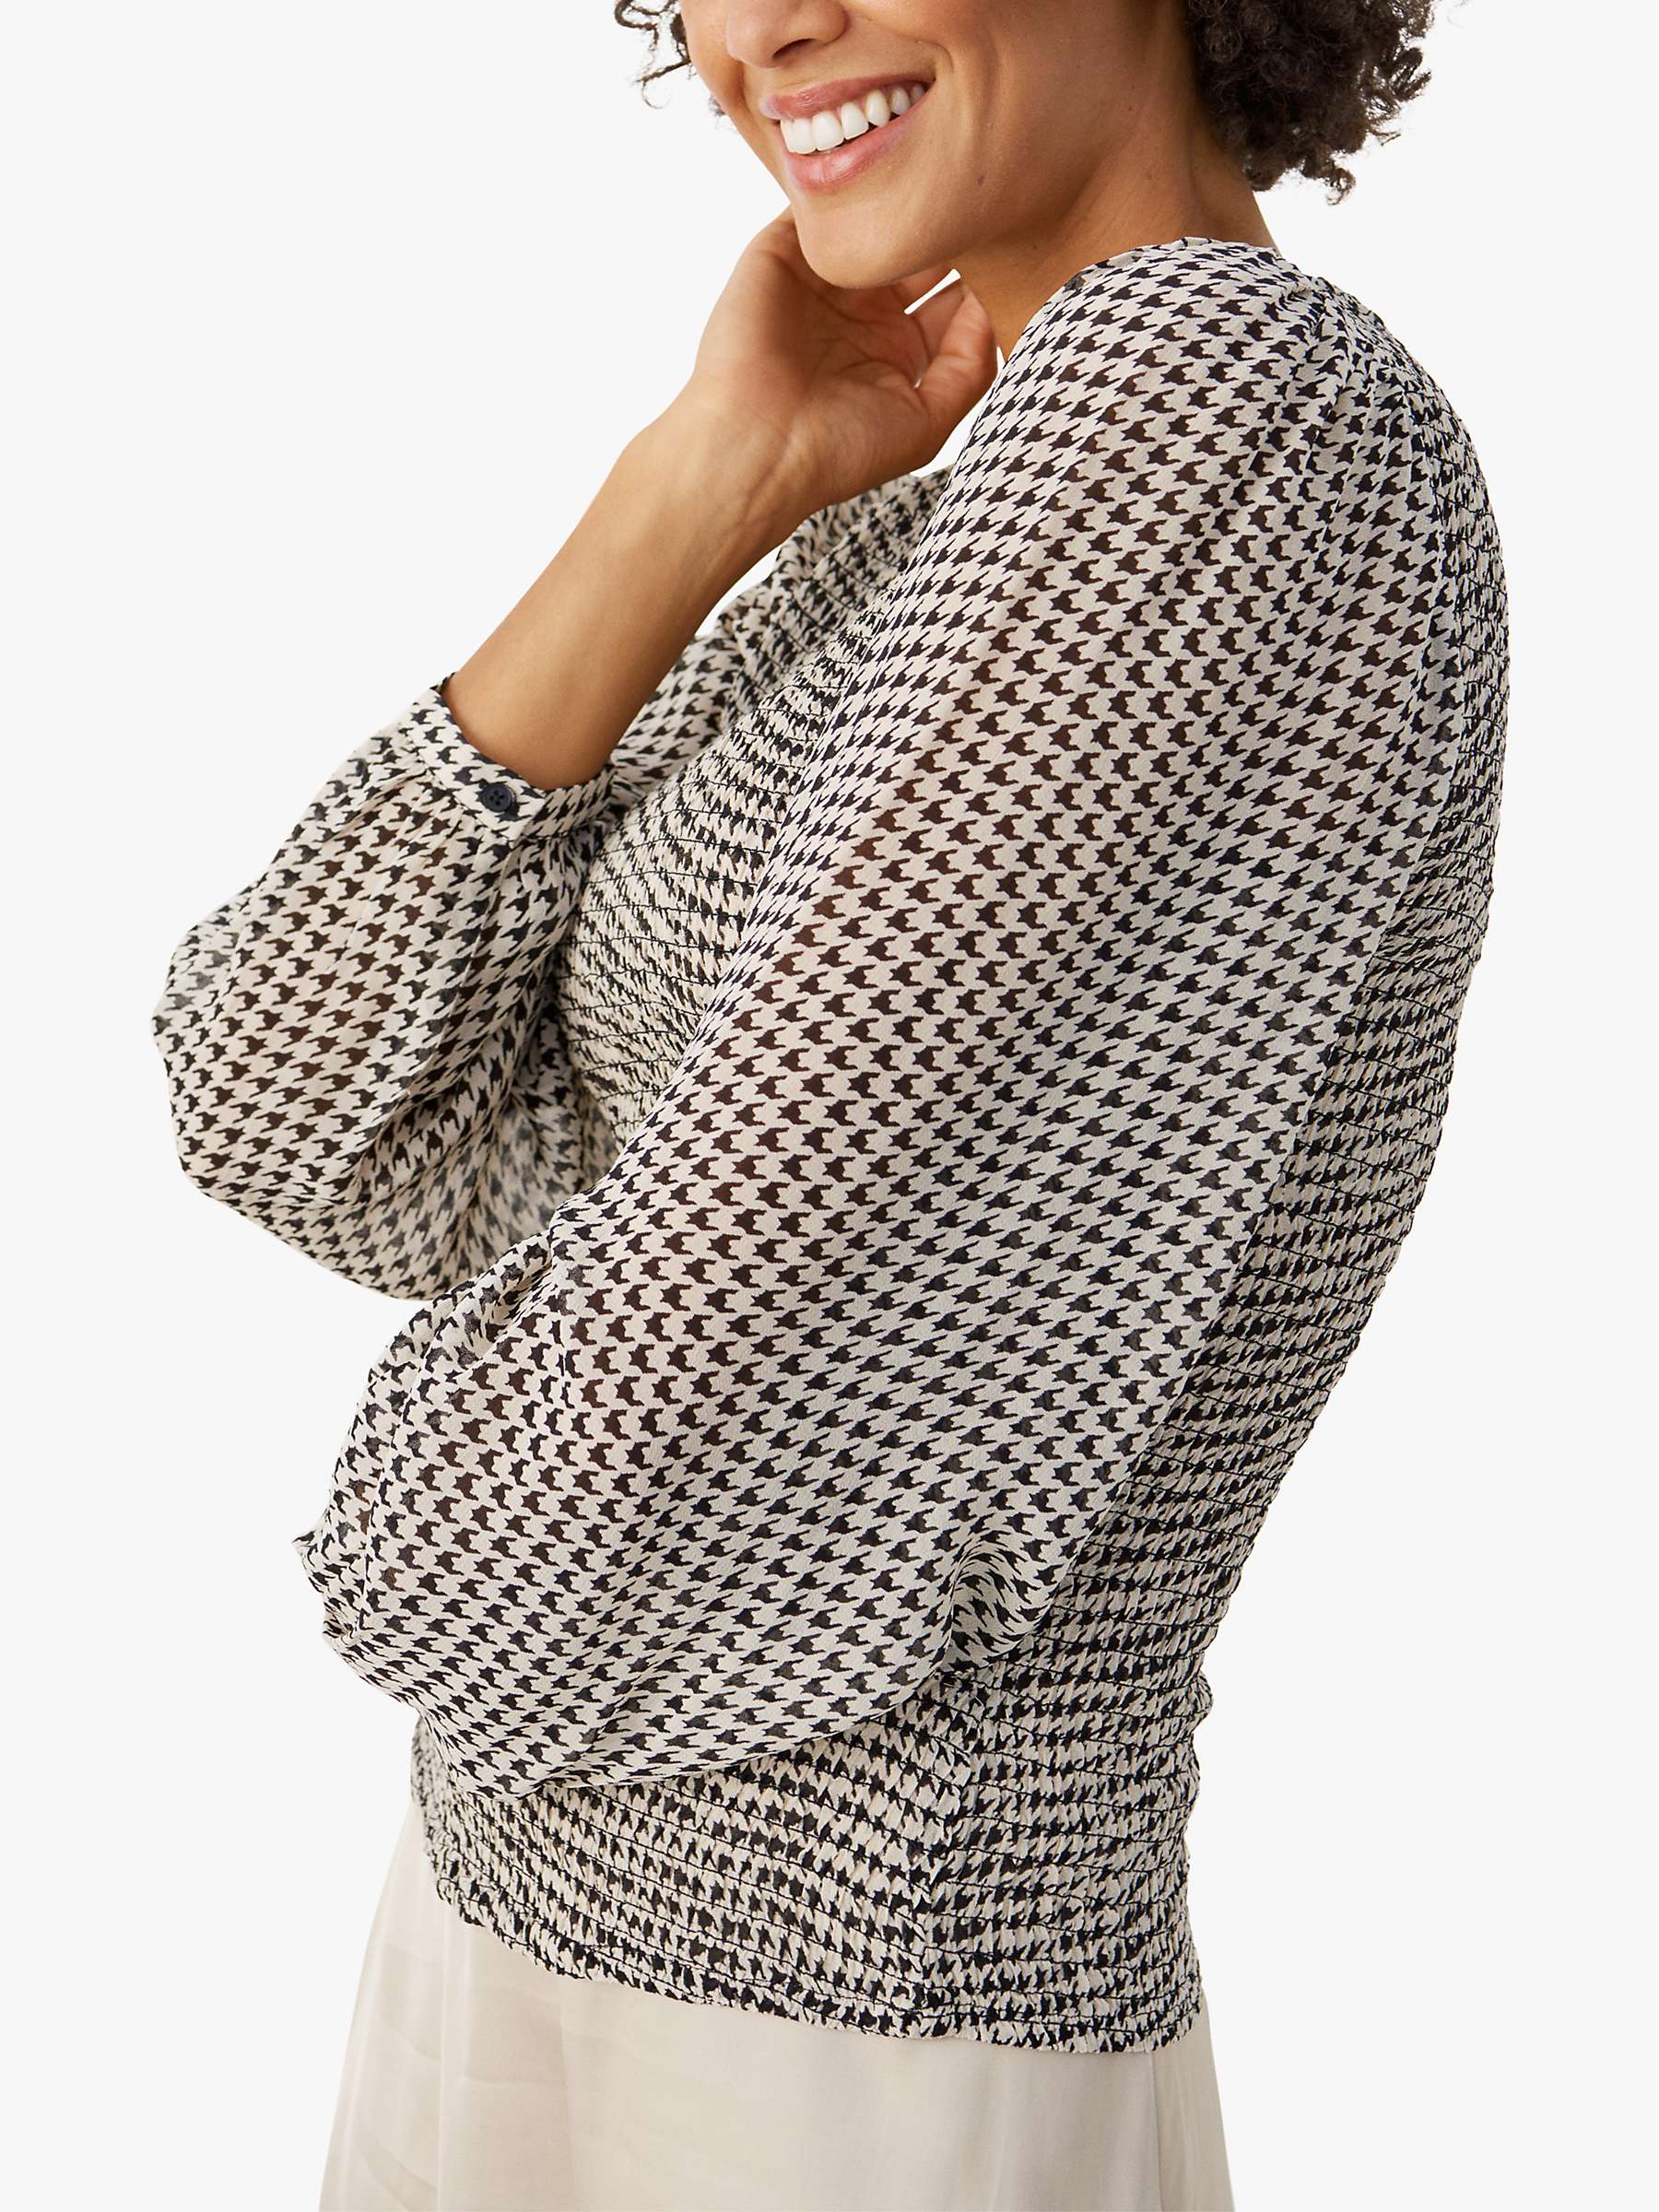 Buy Part Two Thira Houndstooth Blouse, Multi Online at johnlewis.com